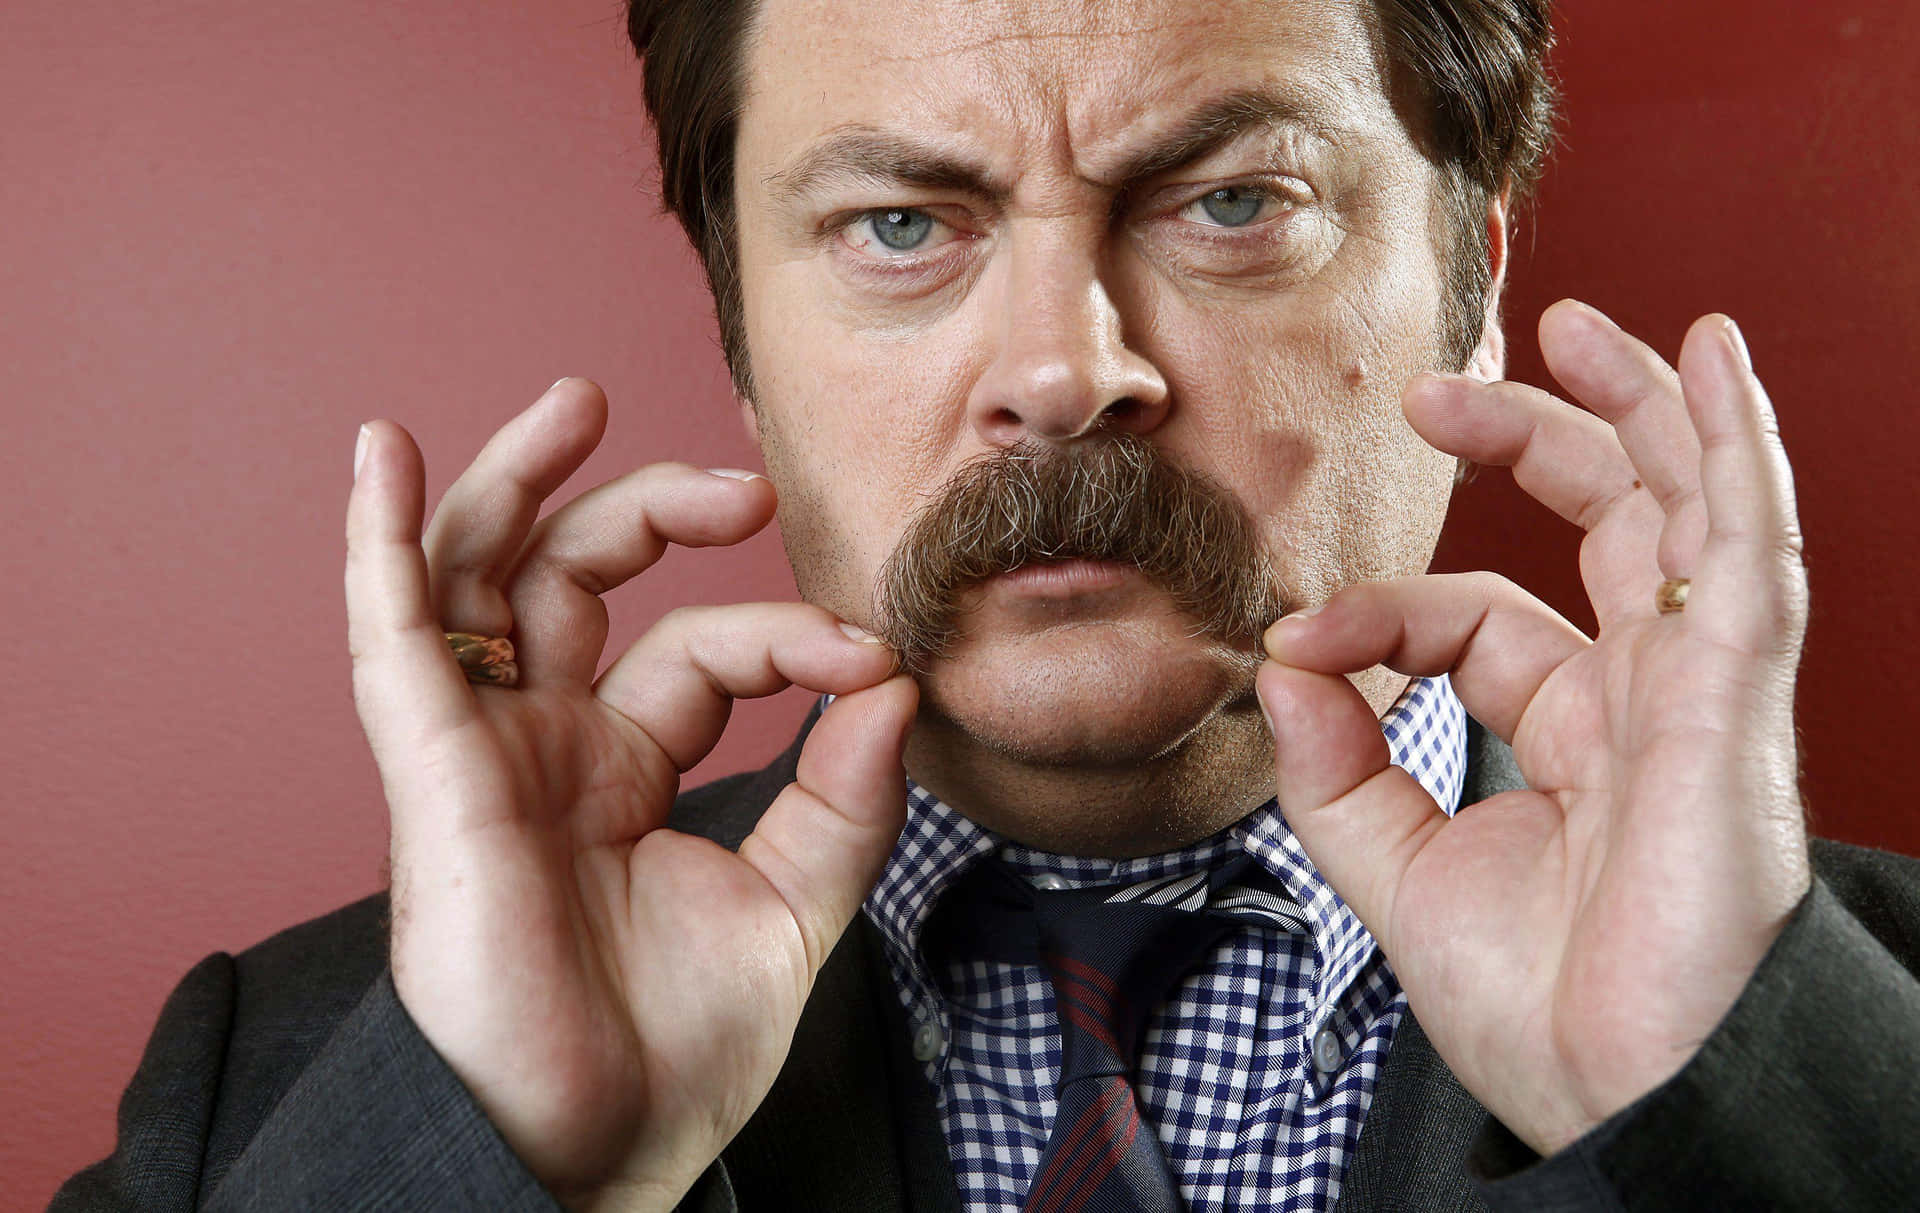 Nick Offerman, America's Beloved Actor And Comedian